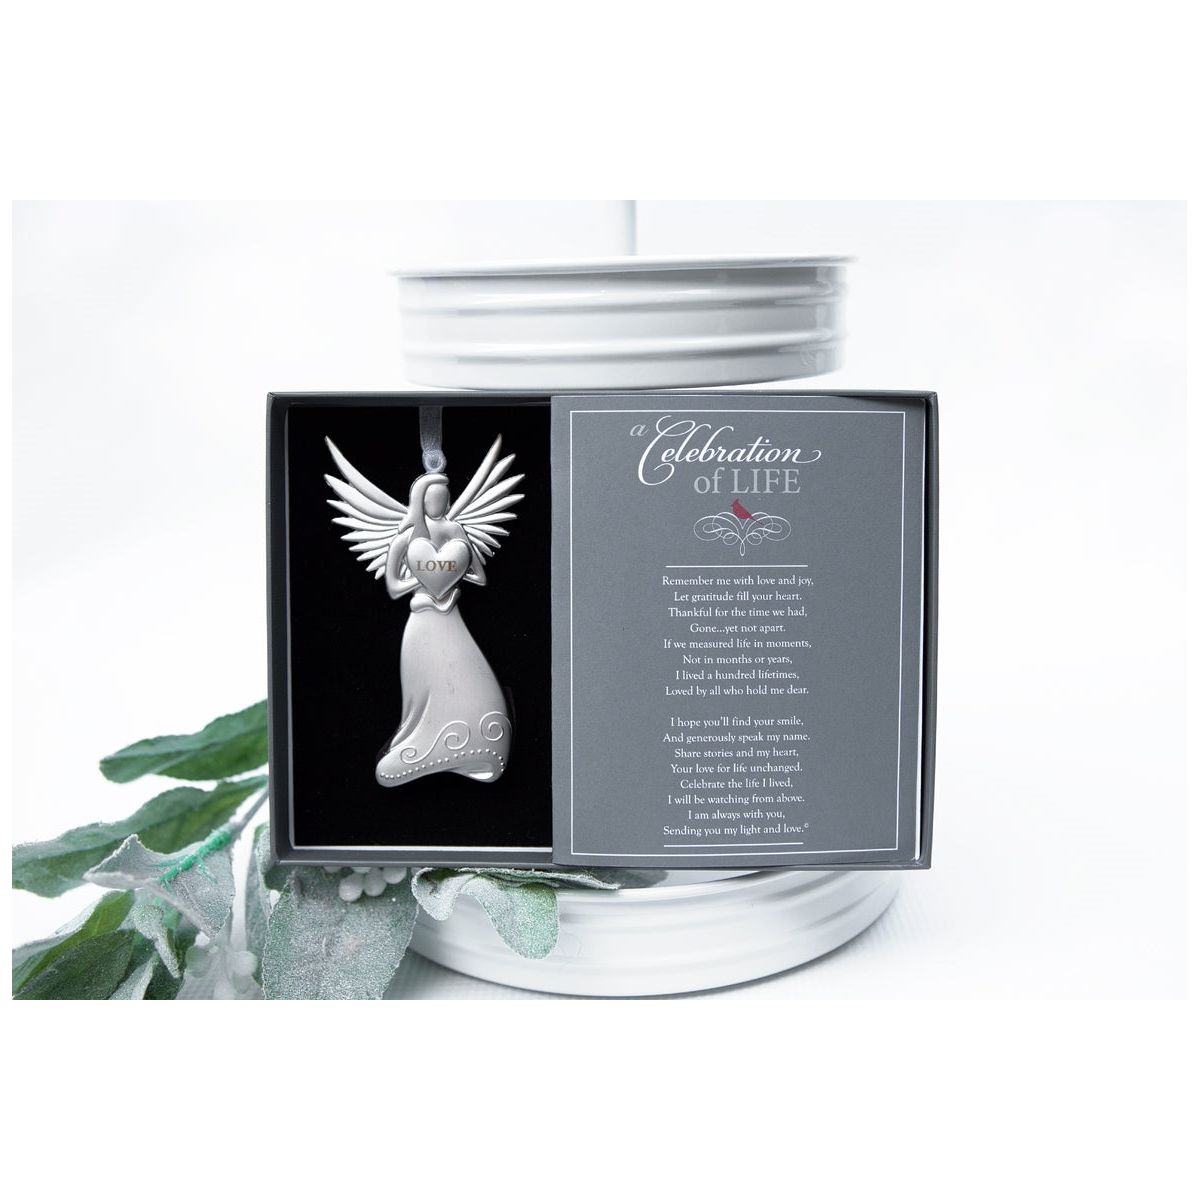 Silver toned metal angel is holding a heart with the word &quot;LOVE&quot; and has a white organza ribbon for hanging.